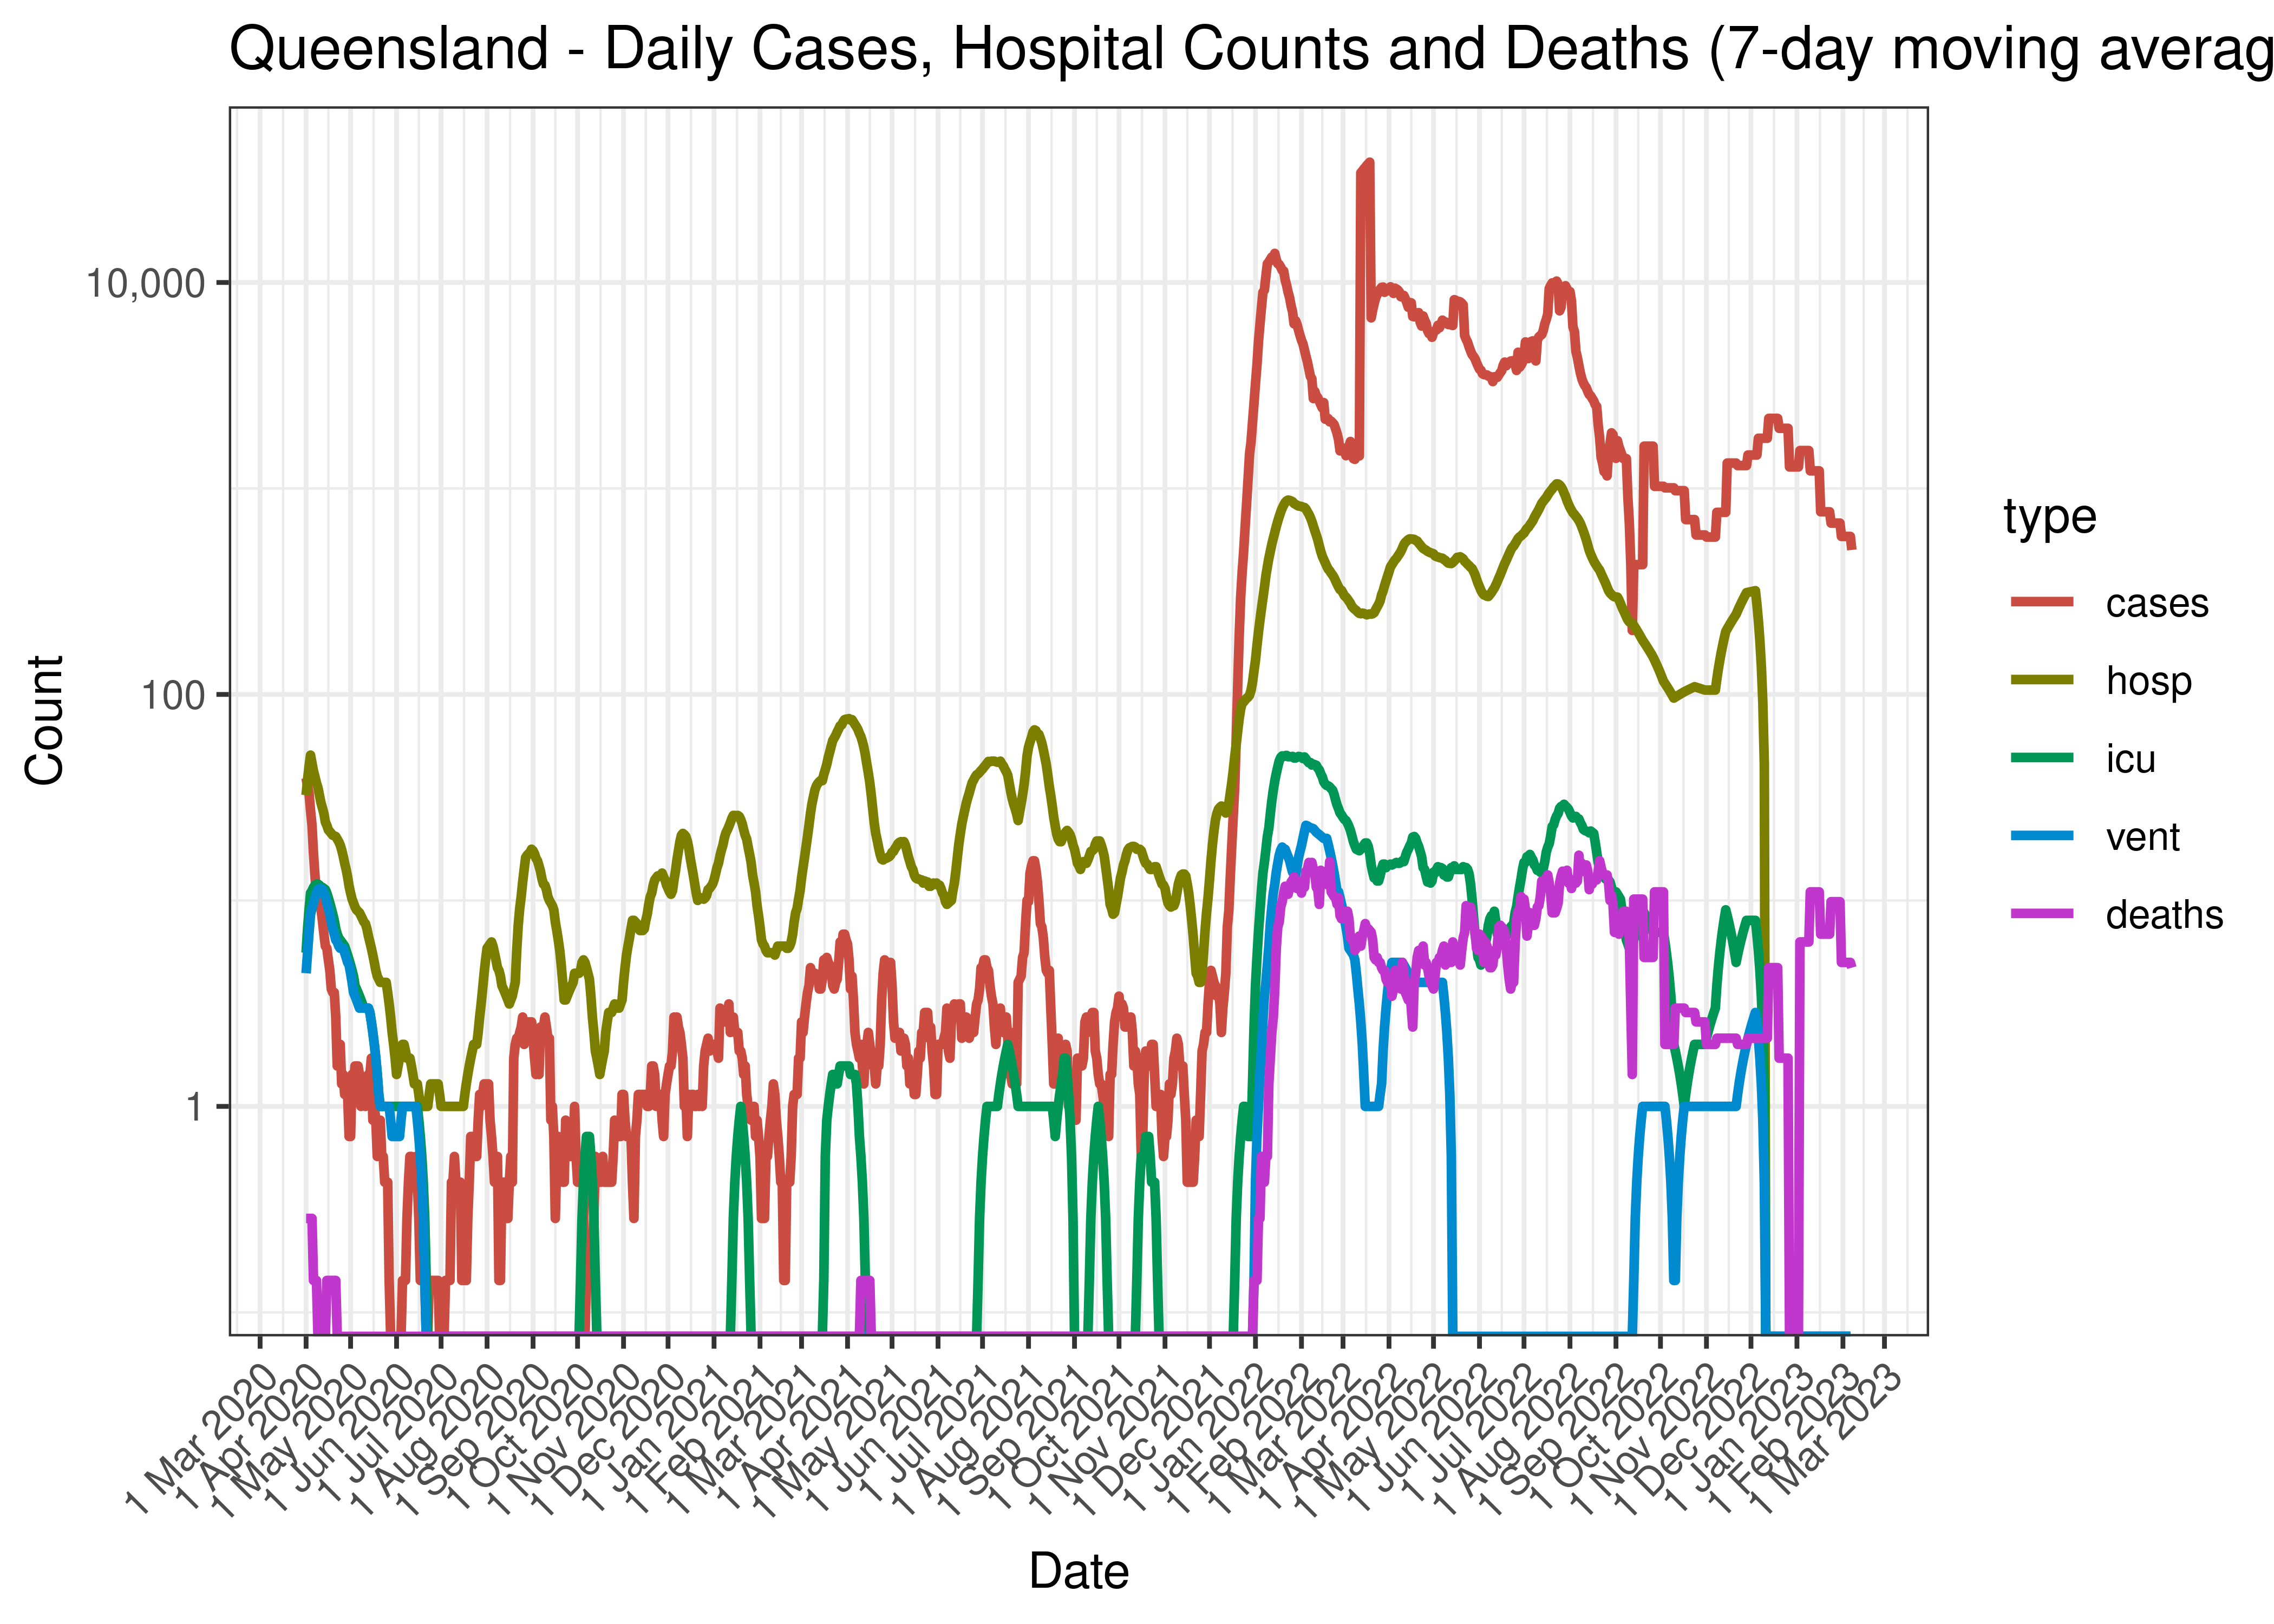 Queensland - Daily Cases, Hospital Counts and Deaths (7-day moving average)